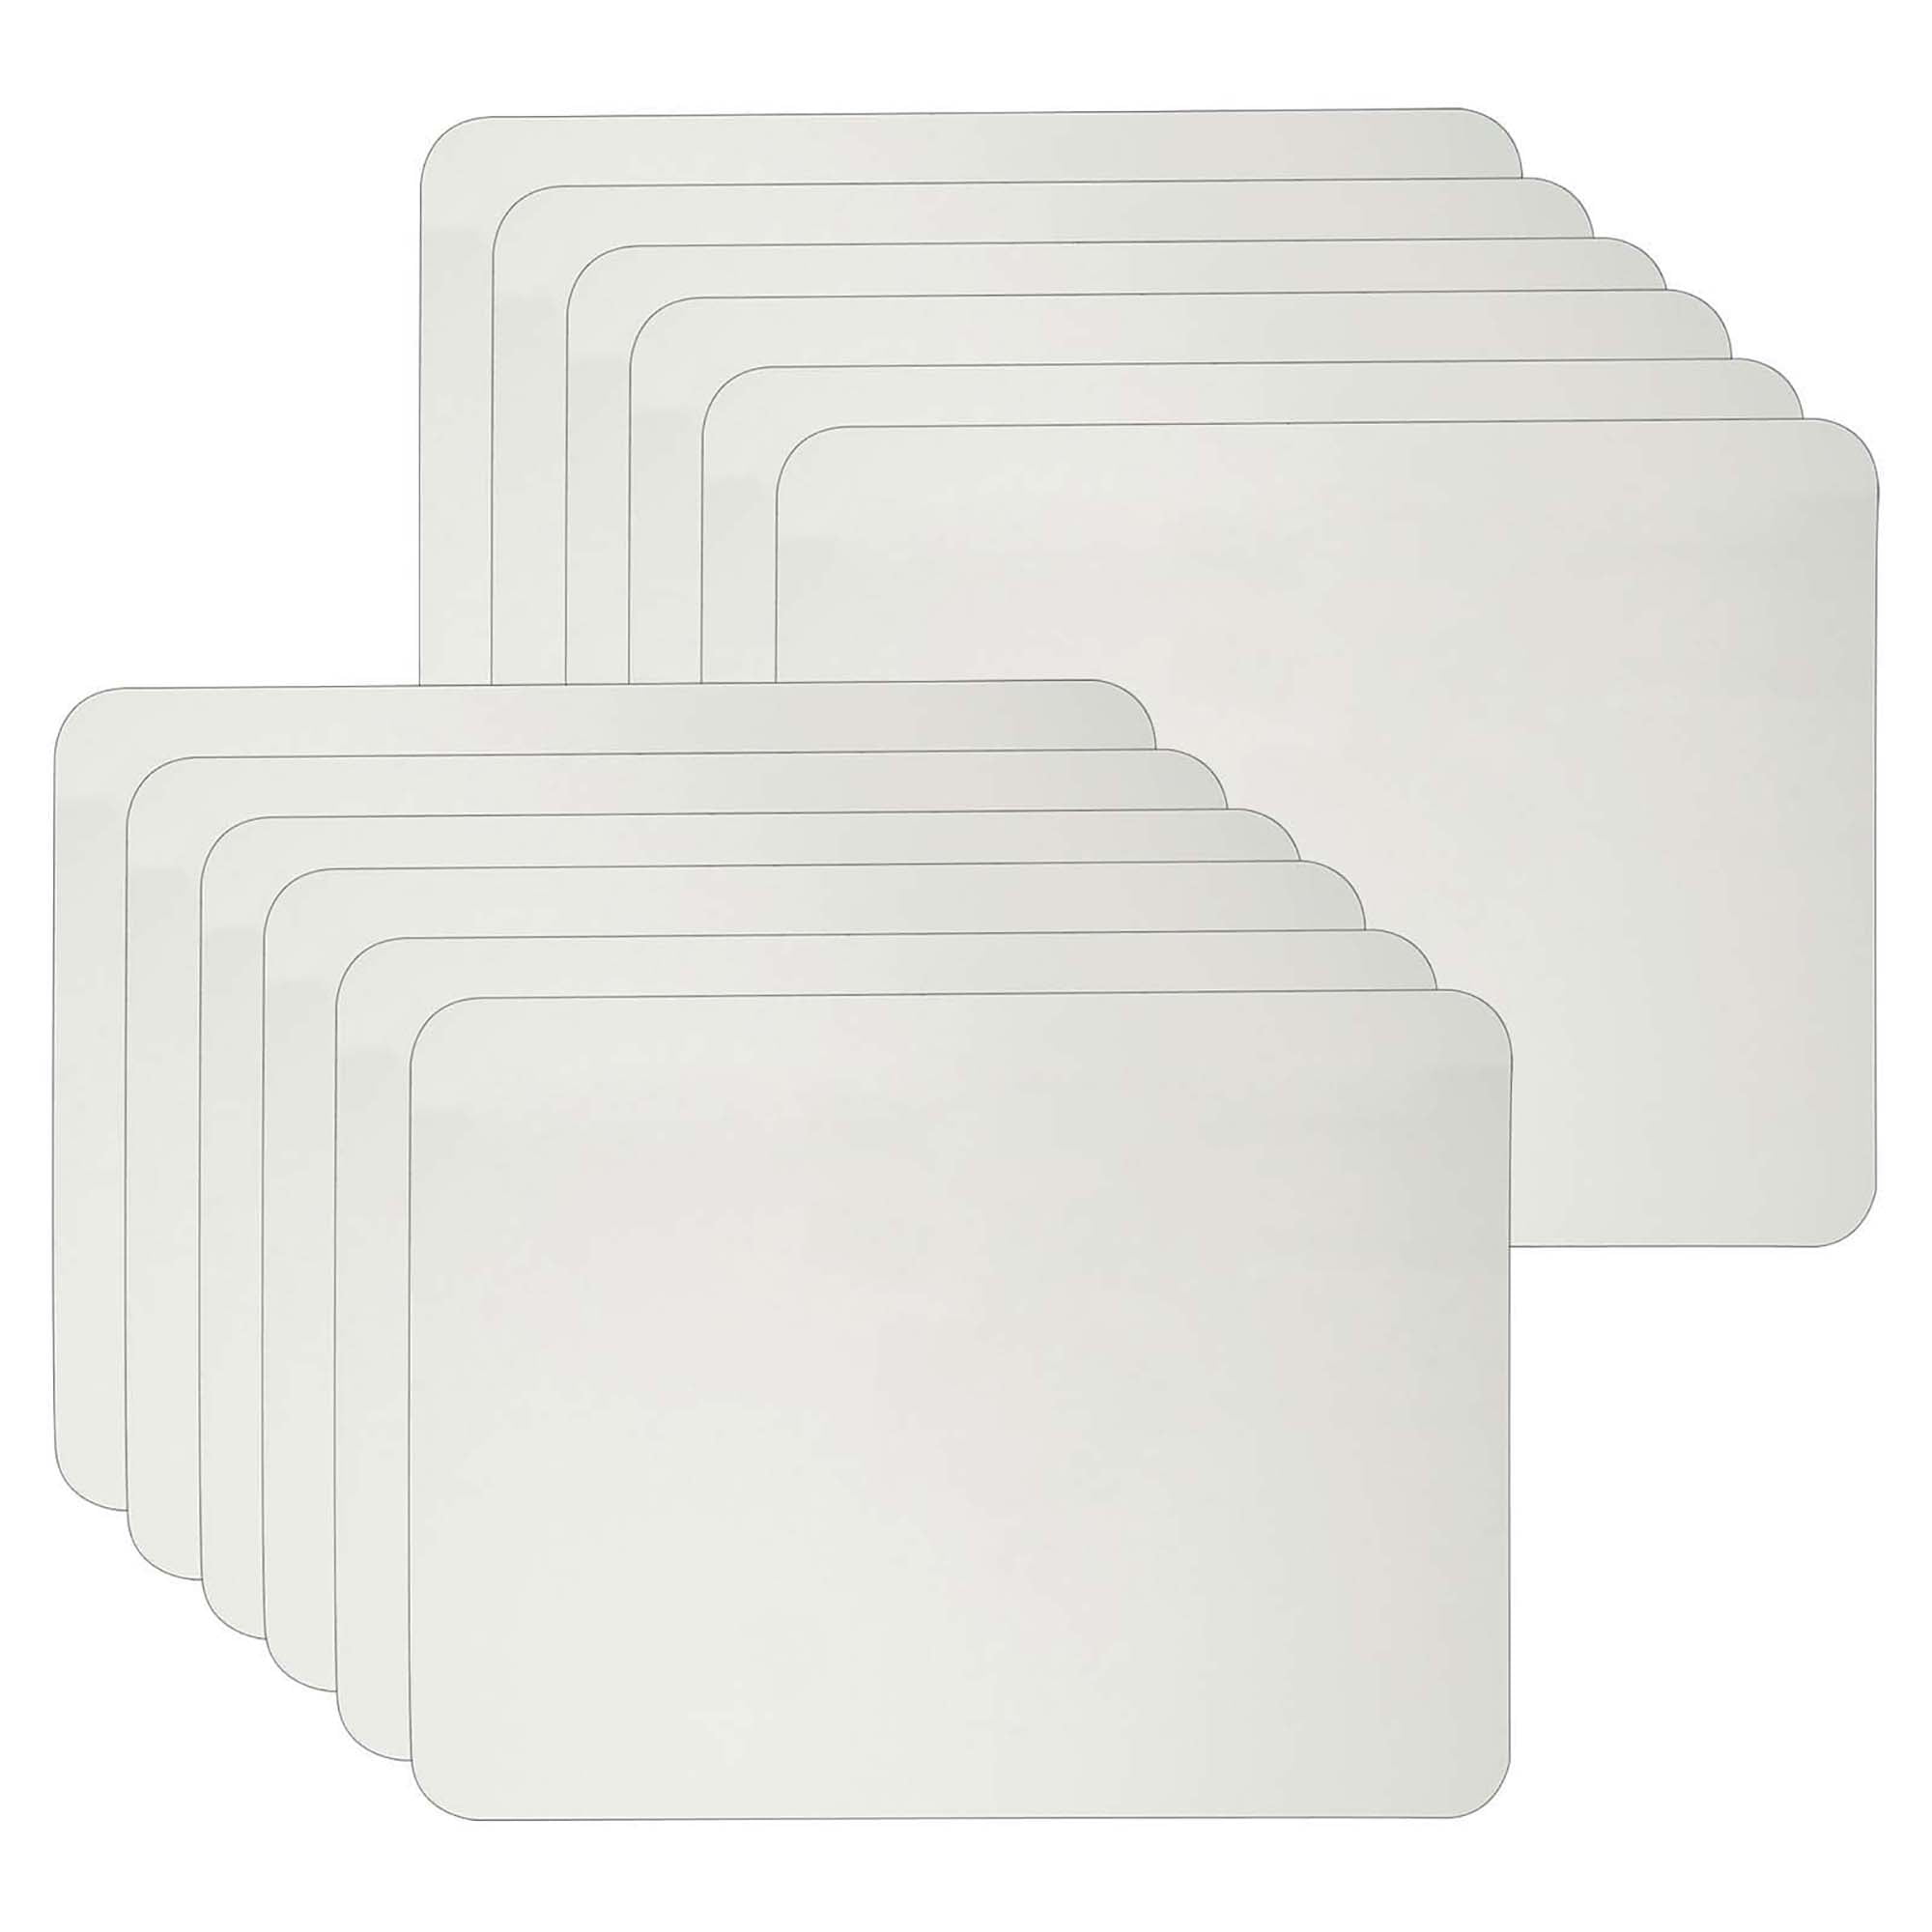 35120 Two Sided 9 x 12 Inches Masonite Charles Leonard Dry Erase Lapboard White 1 Each Plain and Lined 